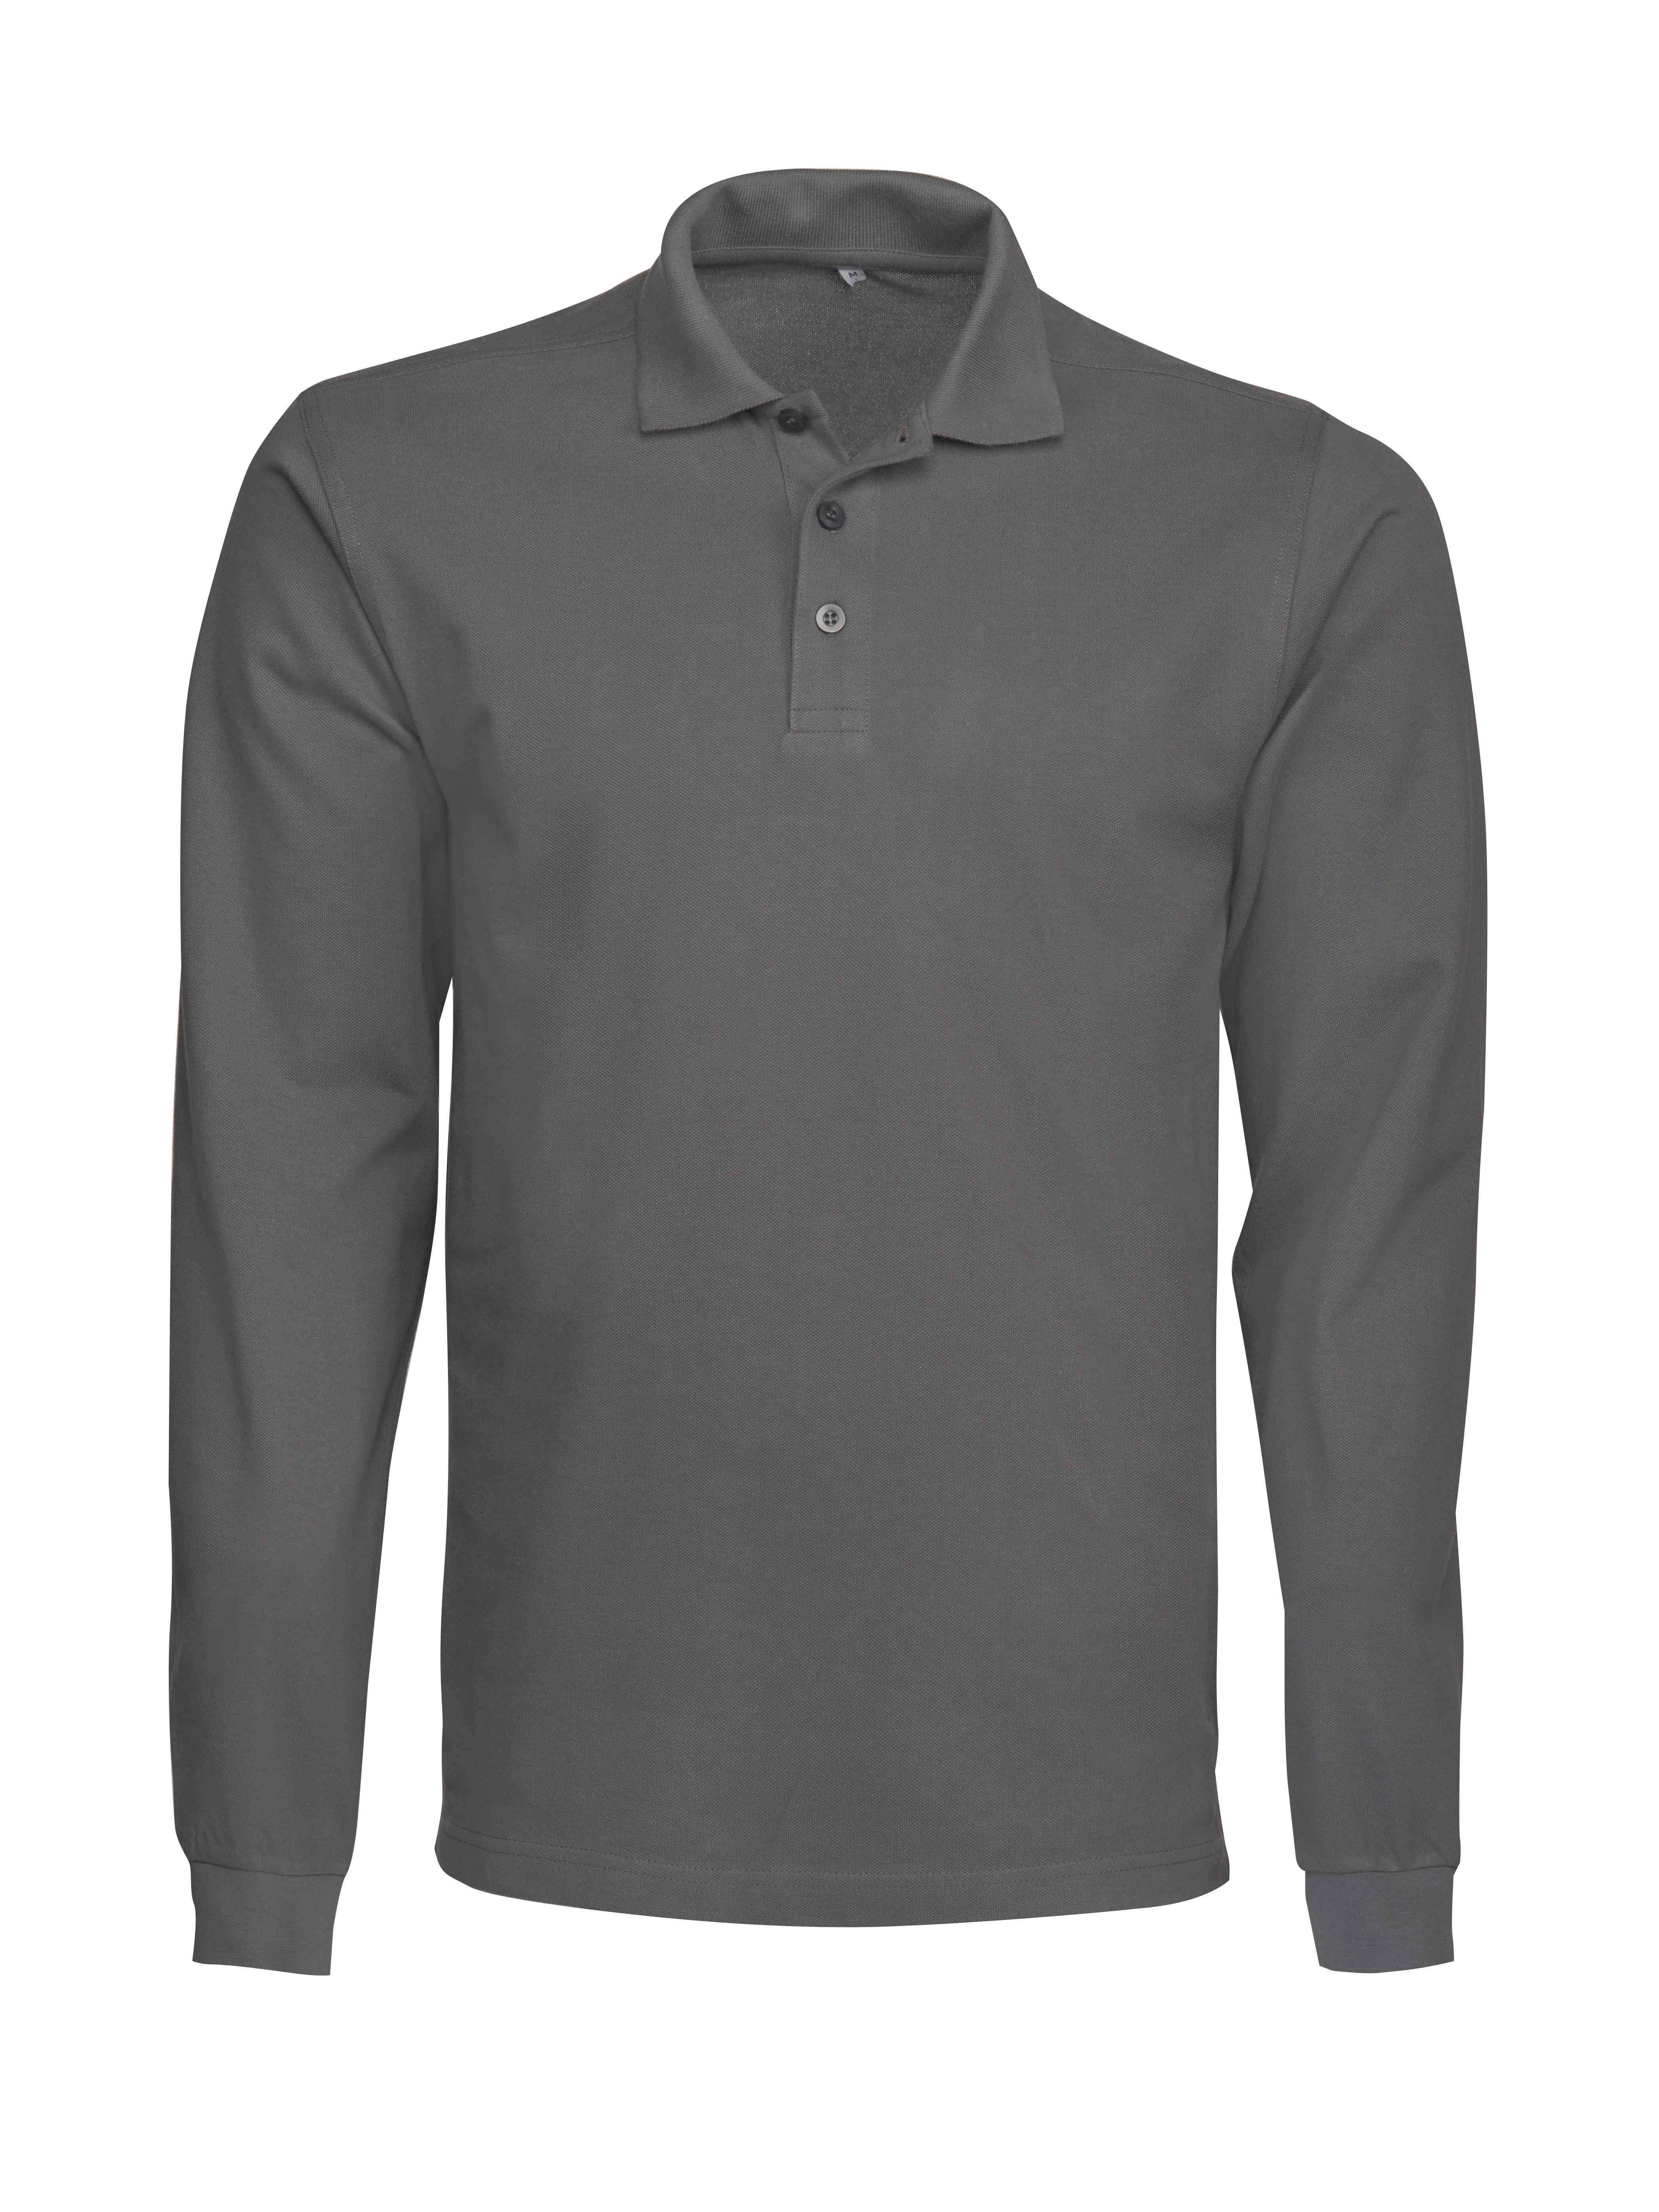 SURF POLO RSX L/S STEEL GREY PE-2265011-935-10